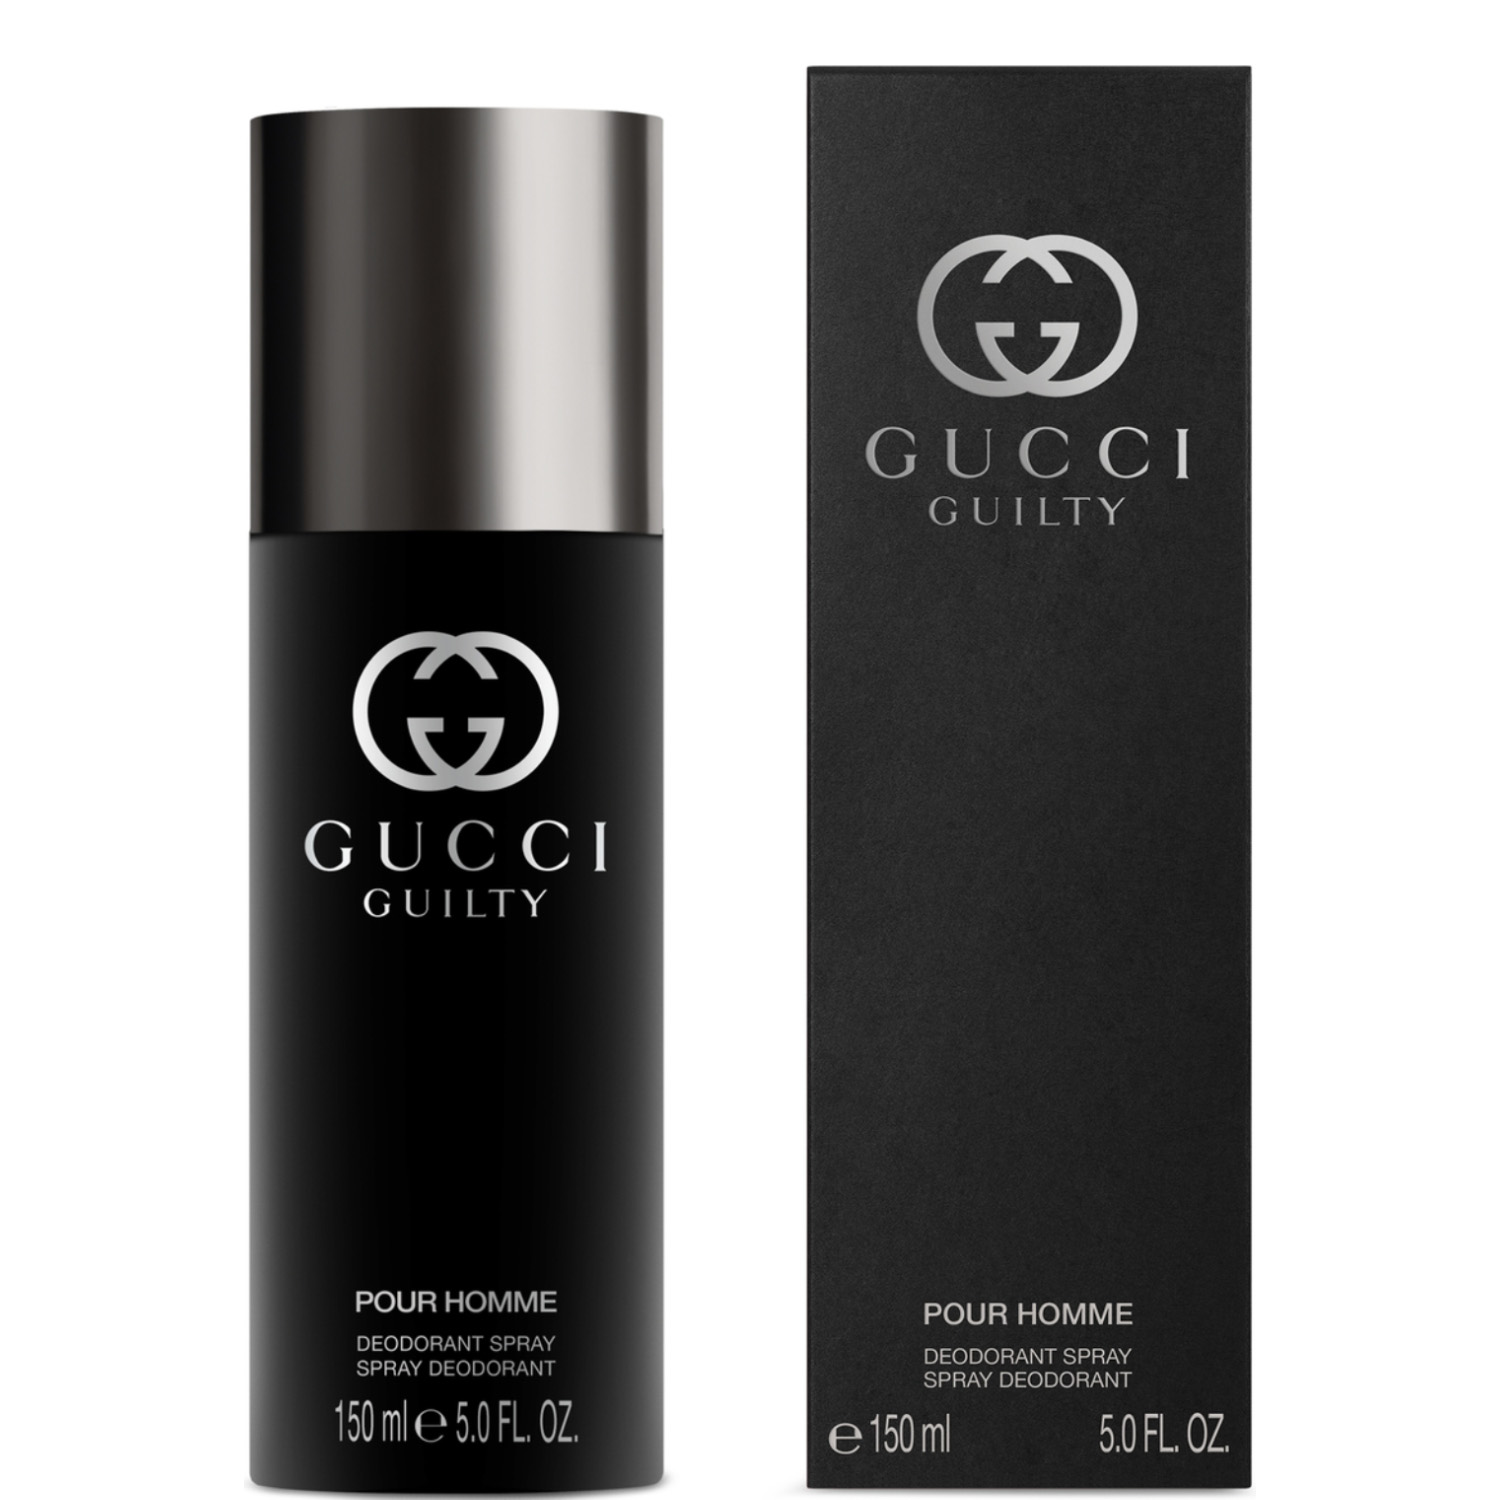 Gucci Guilty Pour Homme Deodorant Spray 150ml